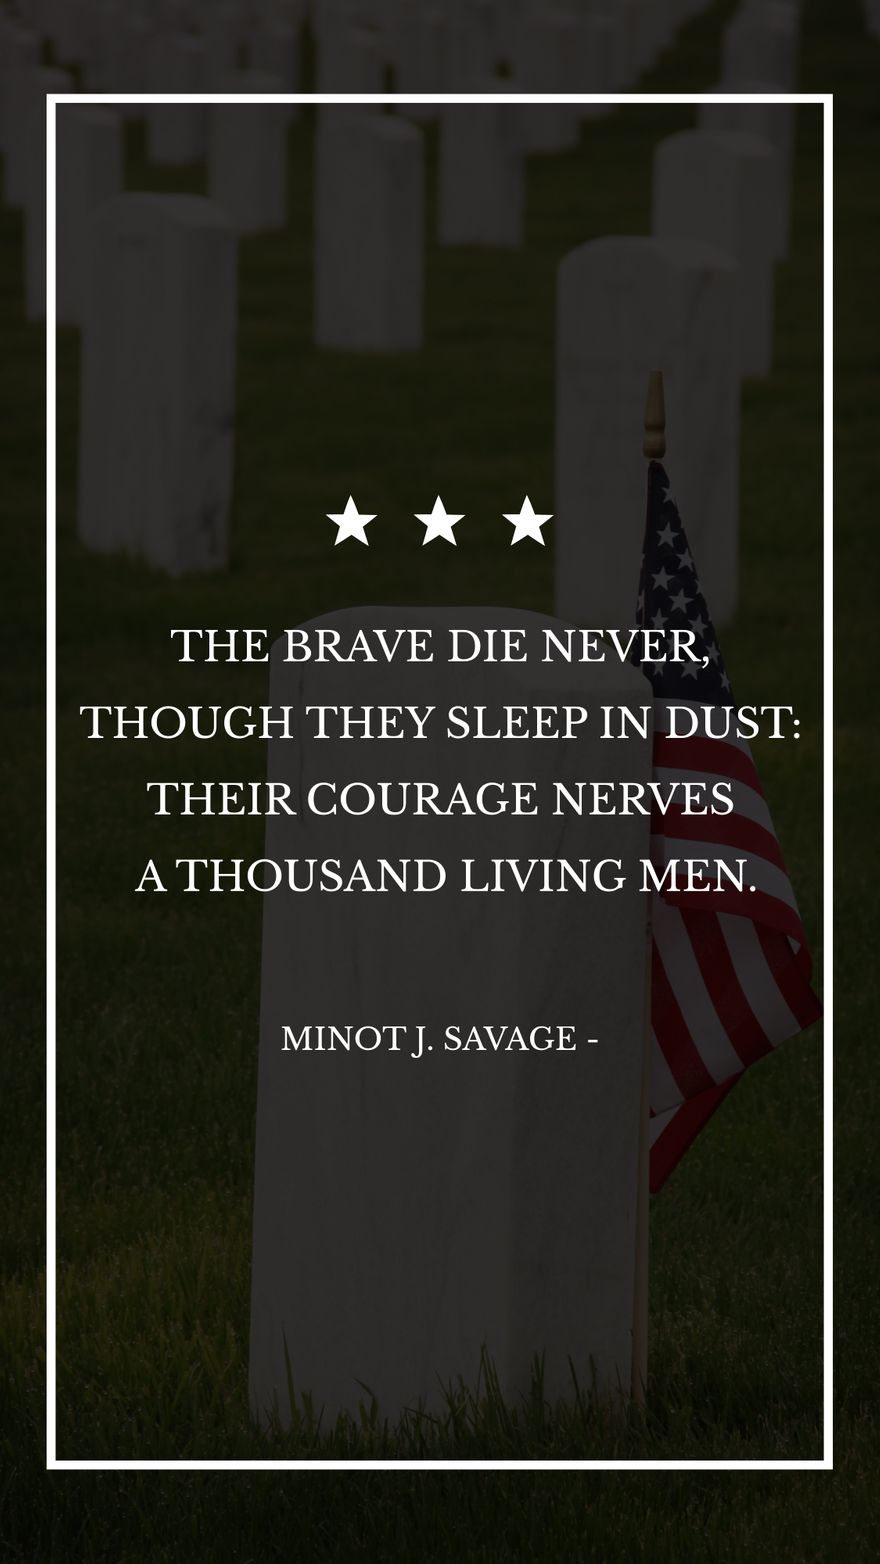 Minot J. Savage - The brave die never, though they sleep in dust: Their courage nerves a thousand living men.